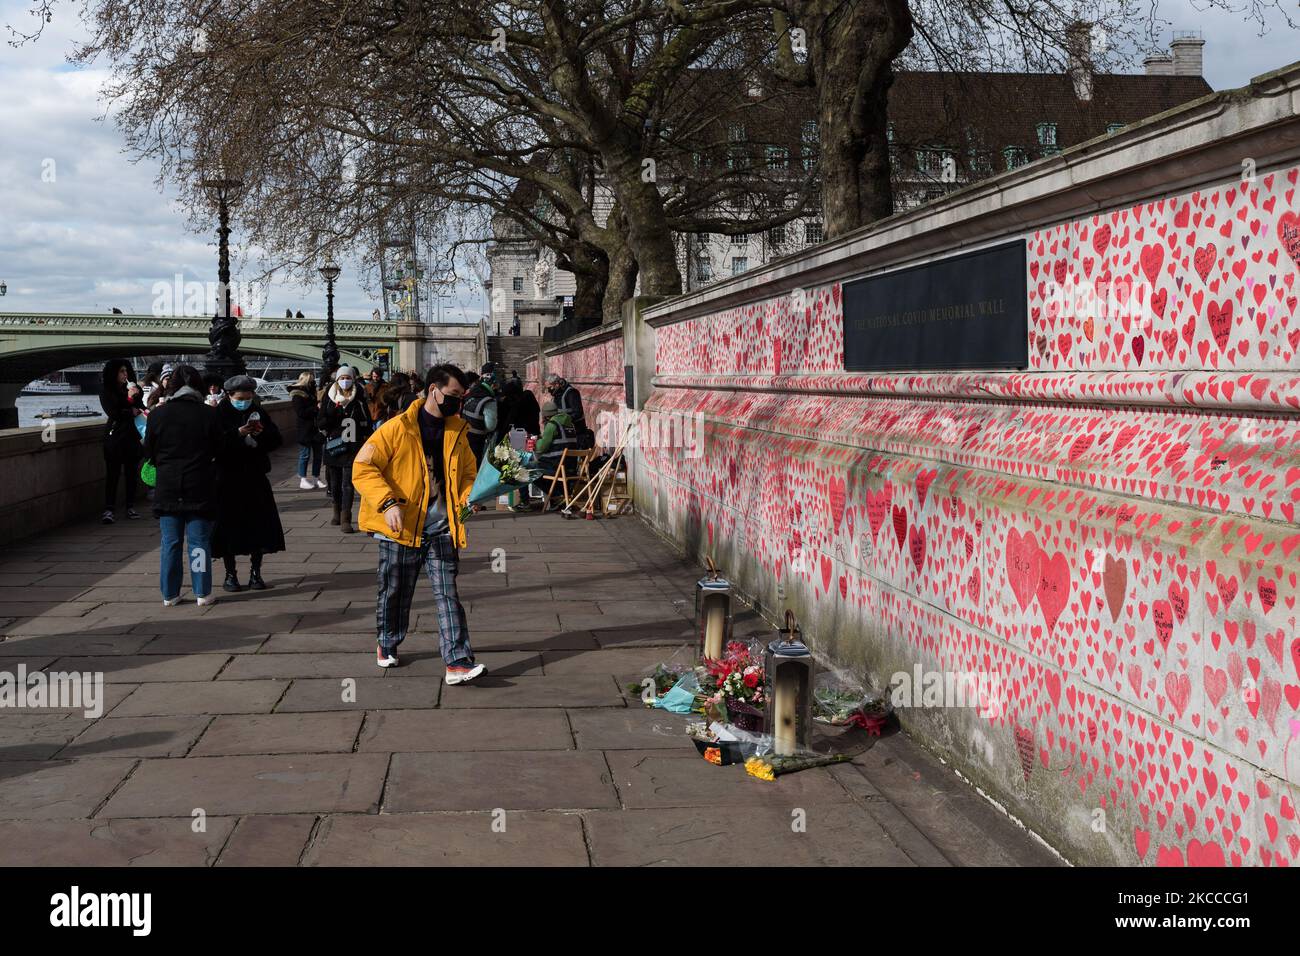 LONDON, UNITED KINGDOM - APRIL 07, 2021: A member of the public lays flowers at a memorial for the victims of Covid-19 outside St Thomas’ Hospital on 07 April, 2021 in London, England. The mural, set up by Covid-19 Bereaved Families for Justice on Monday last week, has so far seen around 130,000 hand-drawn hearts placed on a kilometre-long section of wall facing the Houses of Parliament. (Photo by WIktor Szymanowicz/NurPhoto) Stock Photo